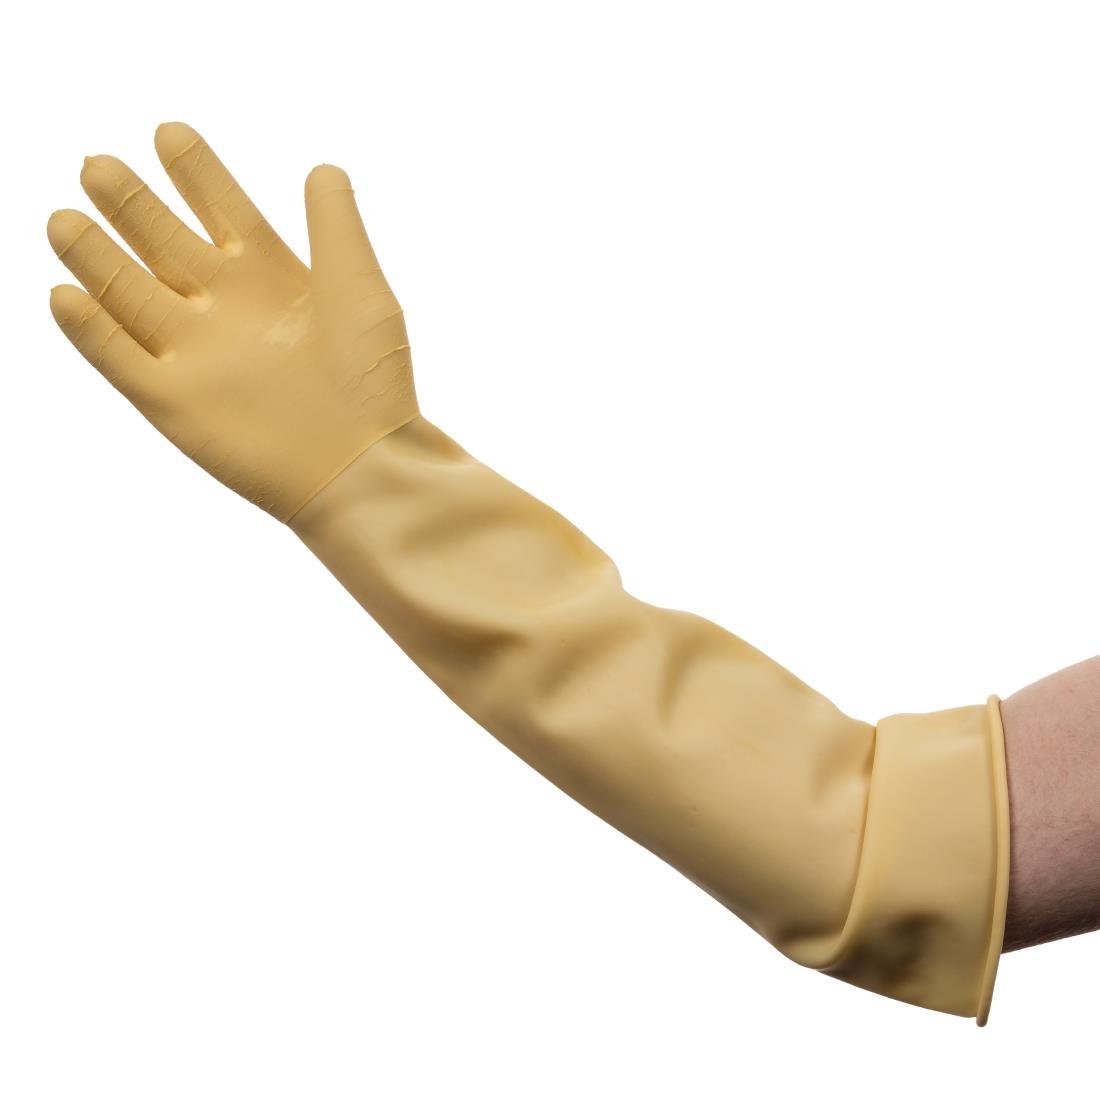 MAPA Trident Heavy Duty Cleaning Glove - CE370  - 1